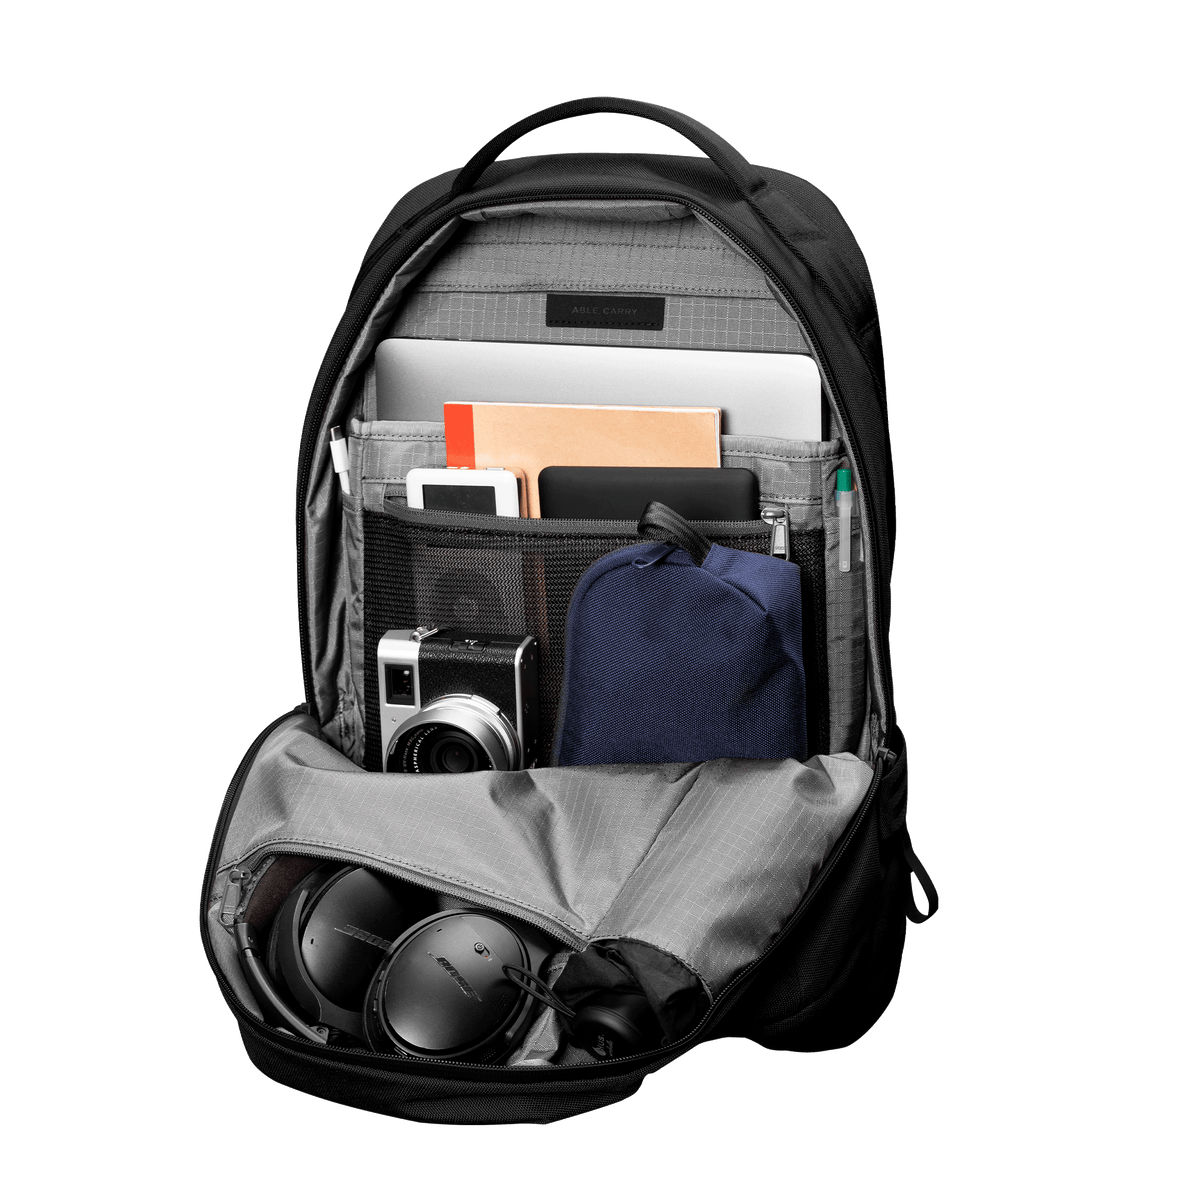 Able Carry Daily Backpack | 20L Comfort Durable Bag